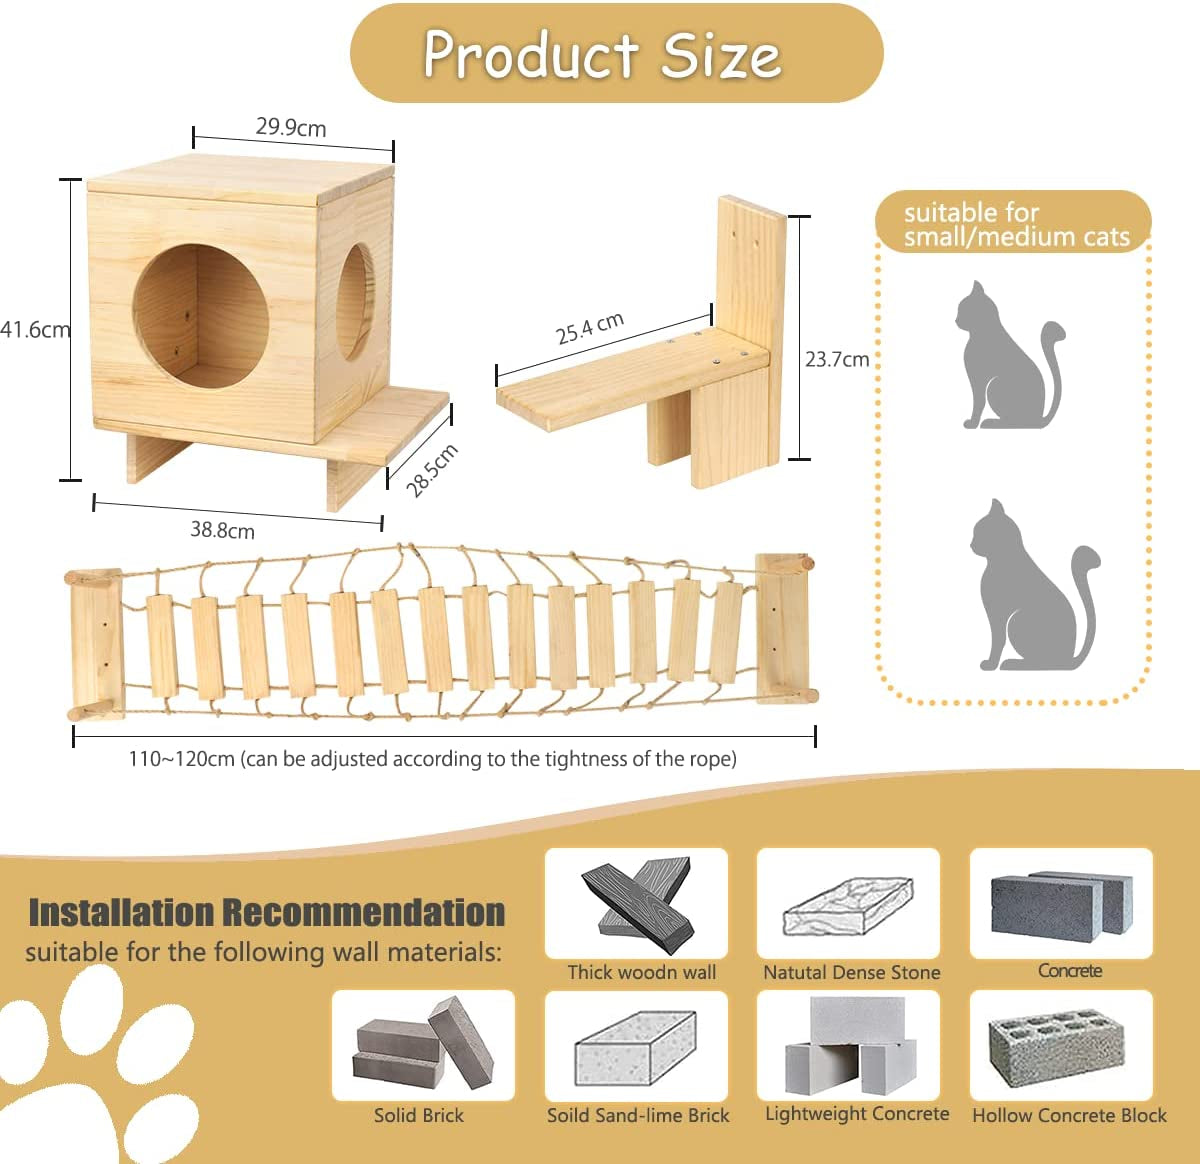 Cat Wall Shelves and Condos for Indoors Cats,Cat Wall Furniture with Solid Wood Climbling Bridge and House for Kitten/Medium Cats to Play and Rest